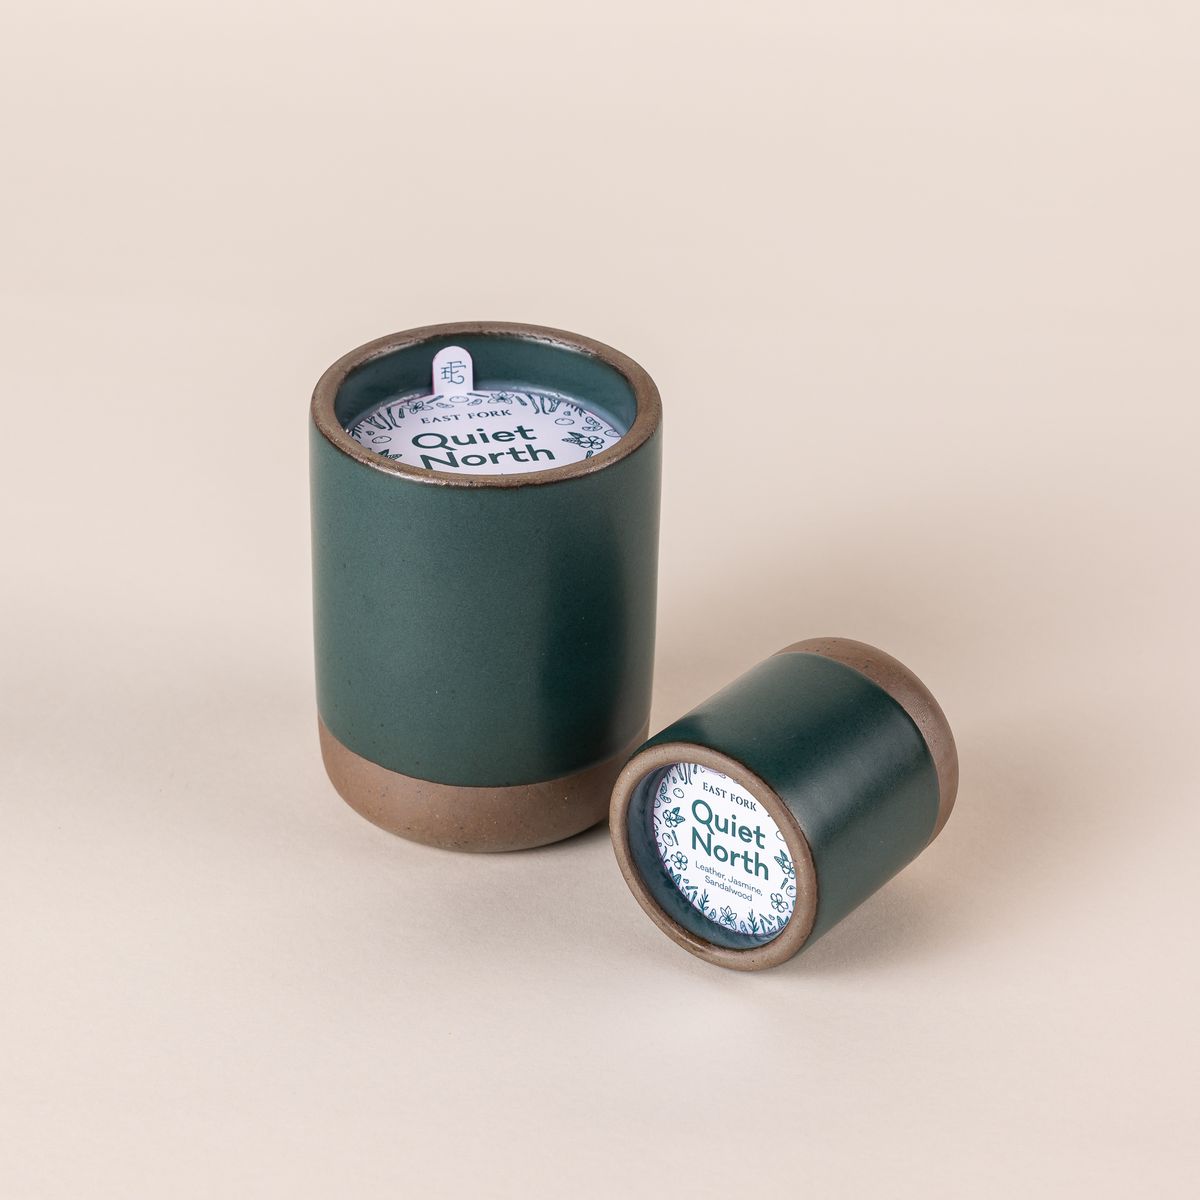 Large and small ceramic vessel in a deep dark teal color with candle inside. On top of each is a packaging label sitting on top that reads "Quiet North". The small candle lays on its side.